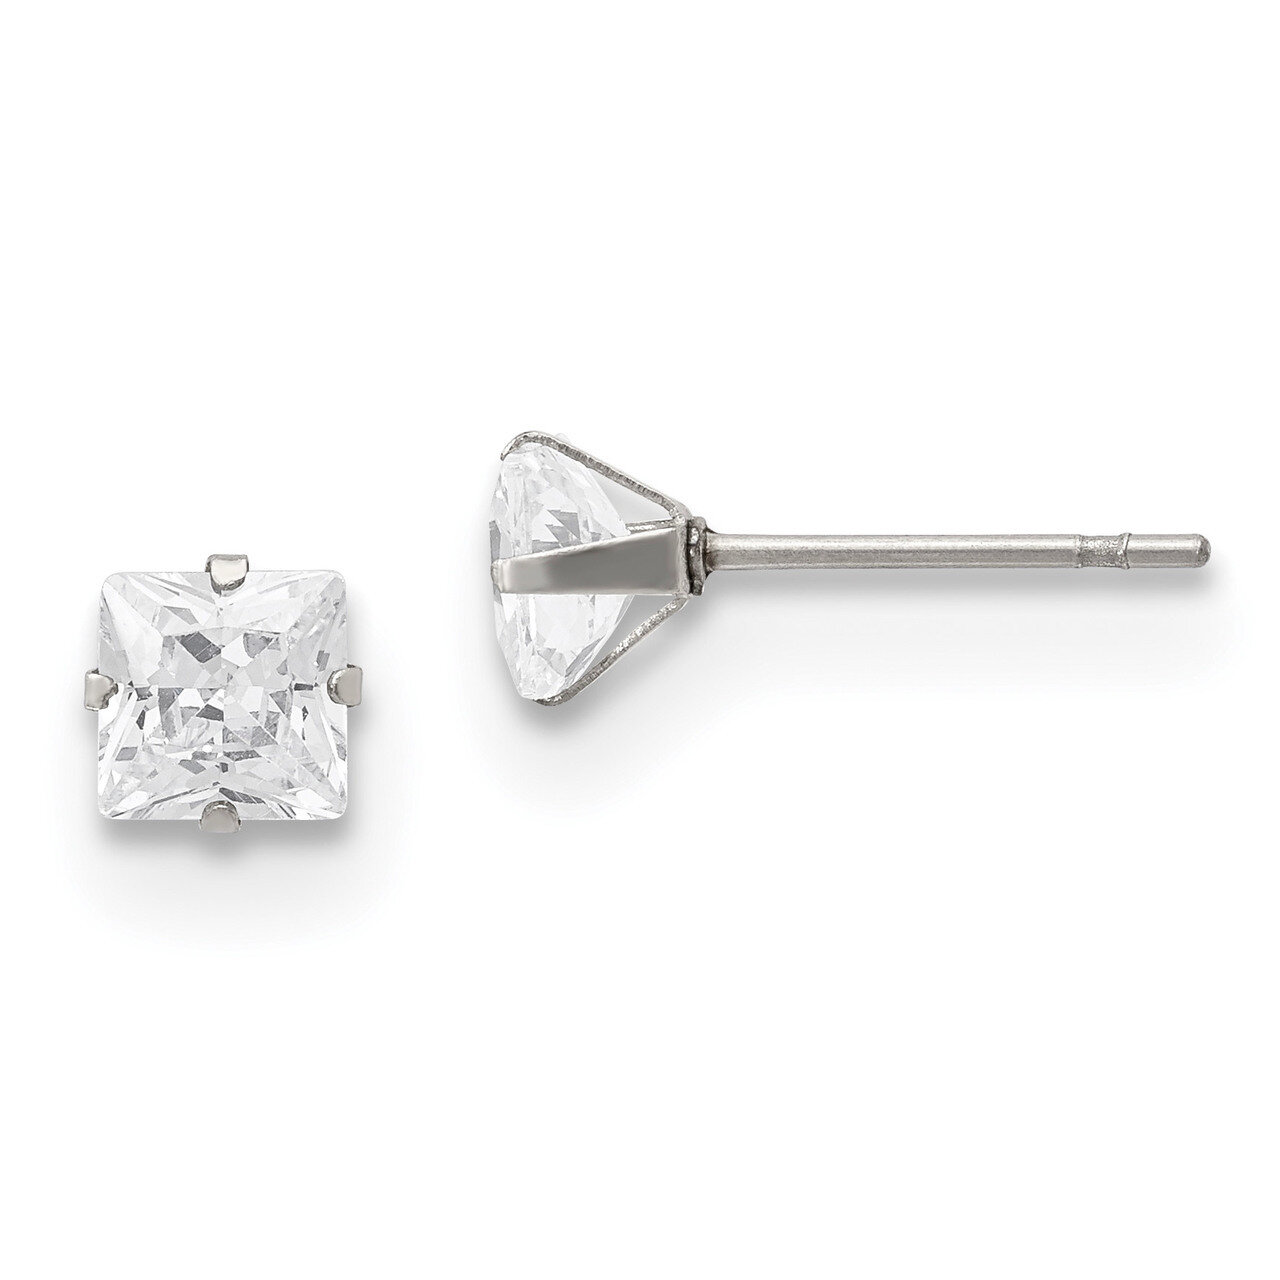 5mm Square Diamond CZ Stud Post Earrings Stainless Steel Polished SRE1101